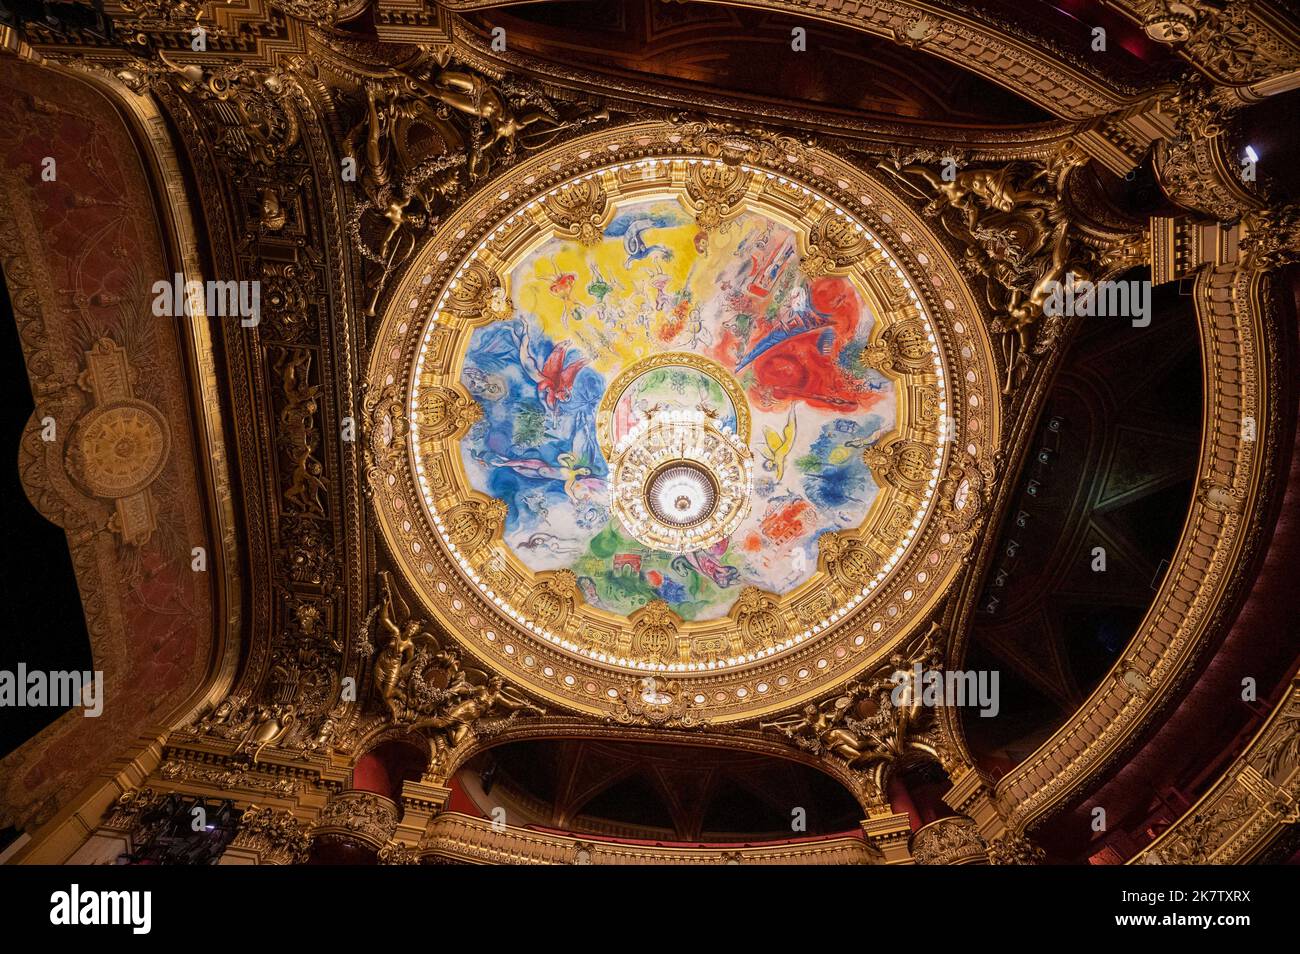 Paris (France): Palais Garnier (Opera Garnier) with its ceiling designed by artist Chagall. Building registered as a National Historic Landmark (Frenc Stock Photo